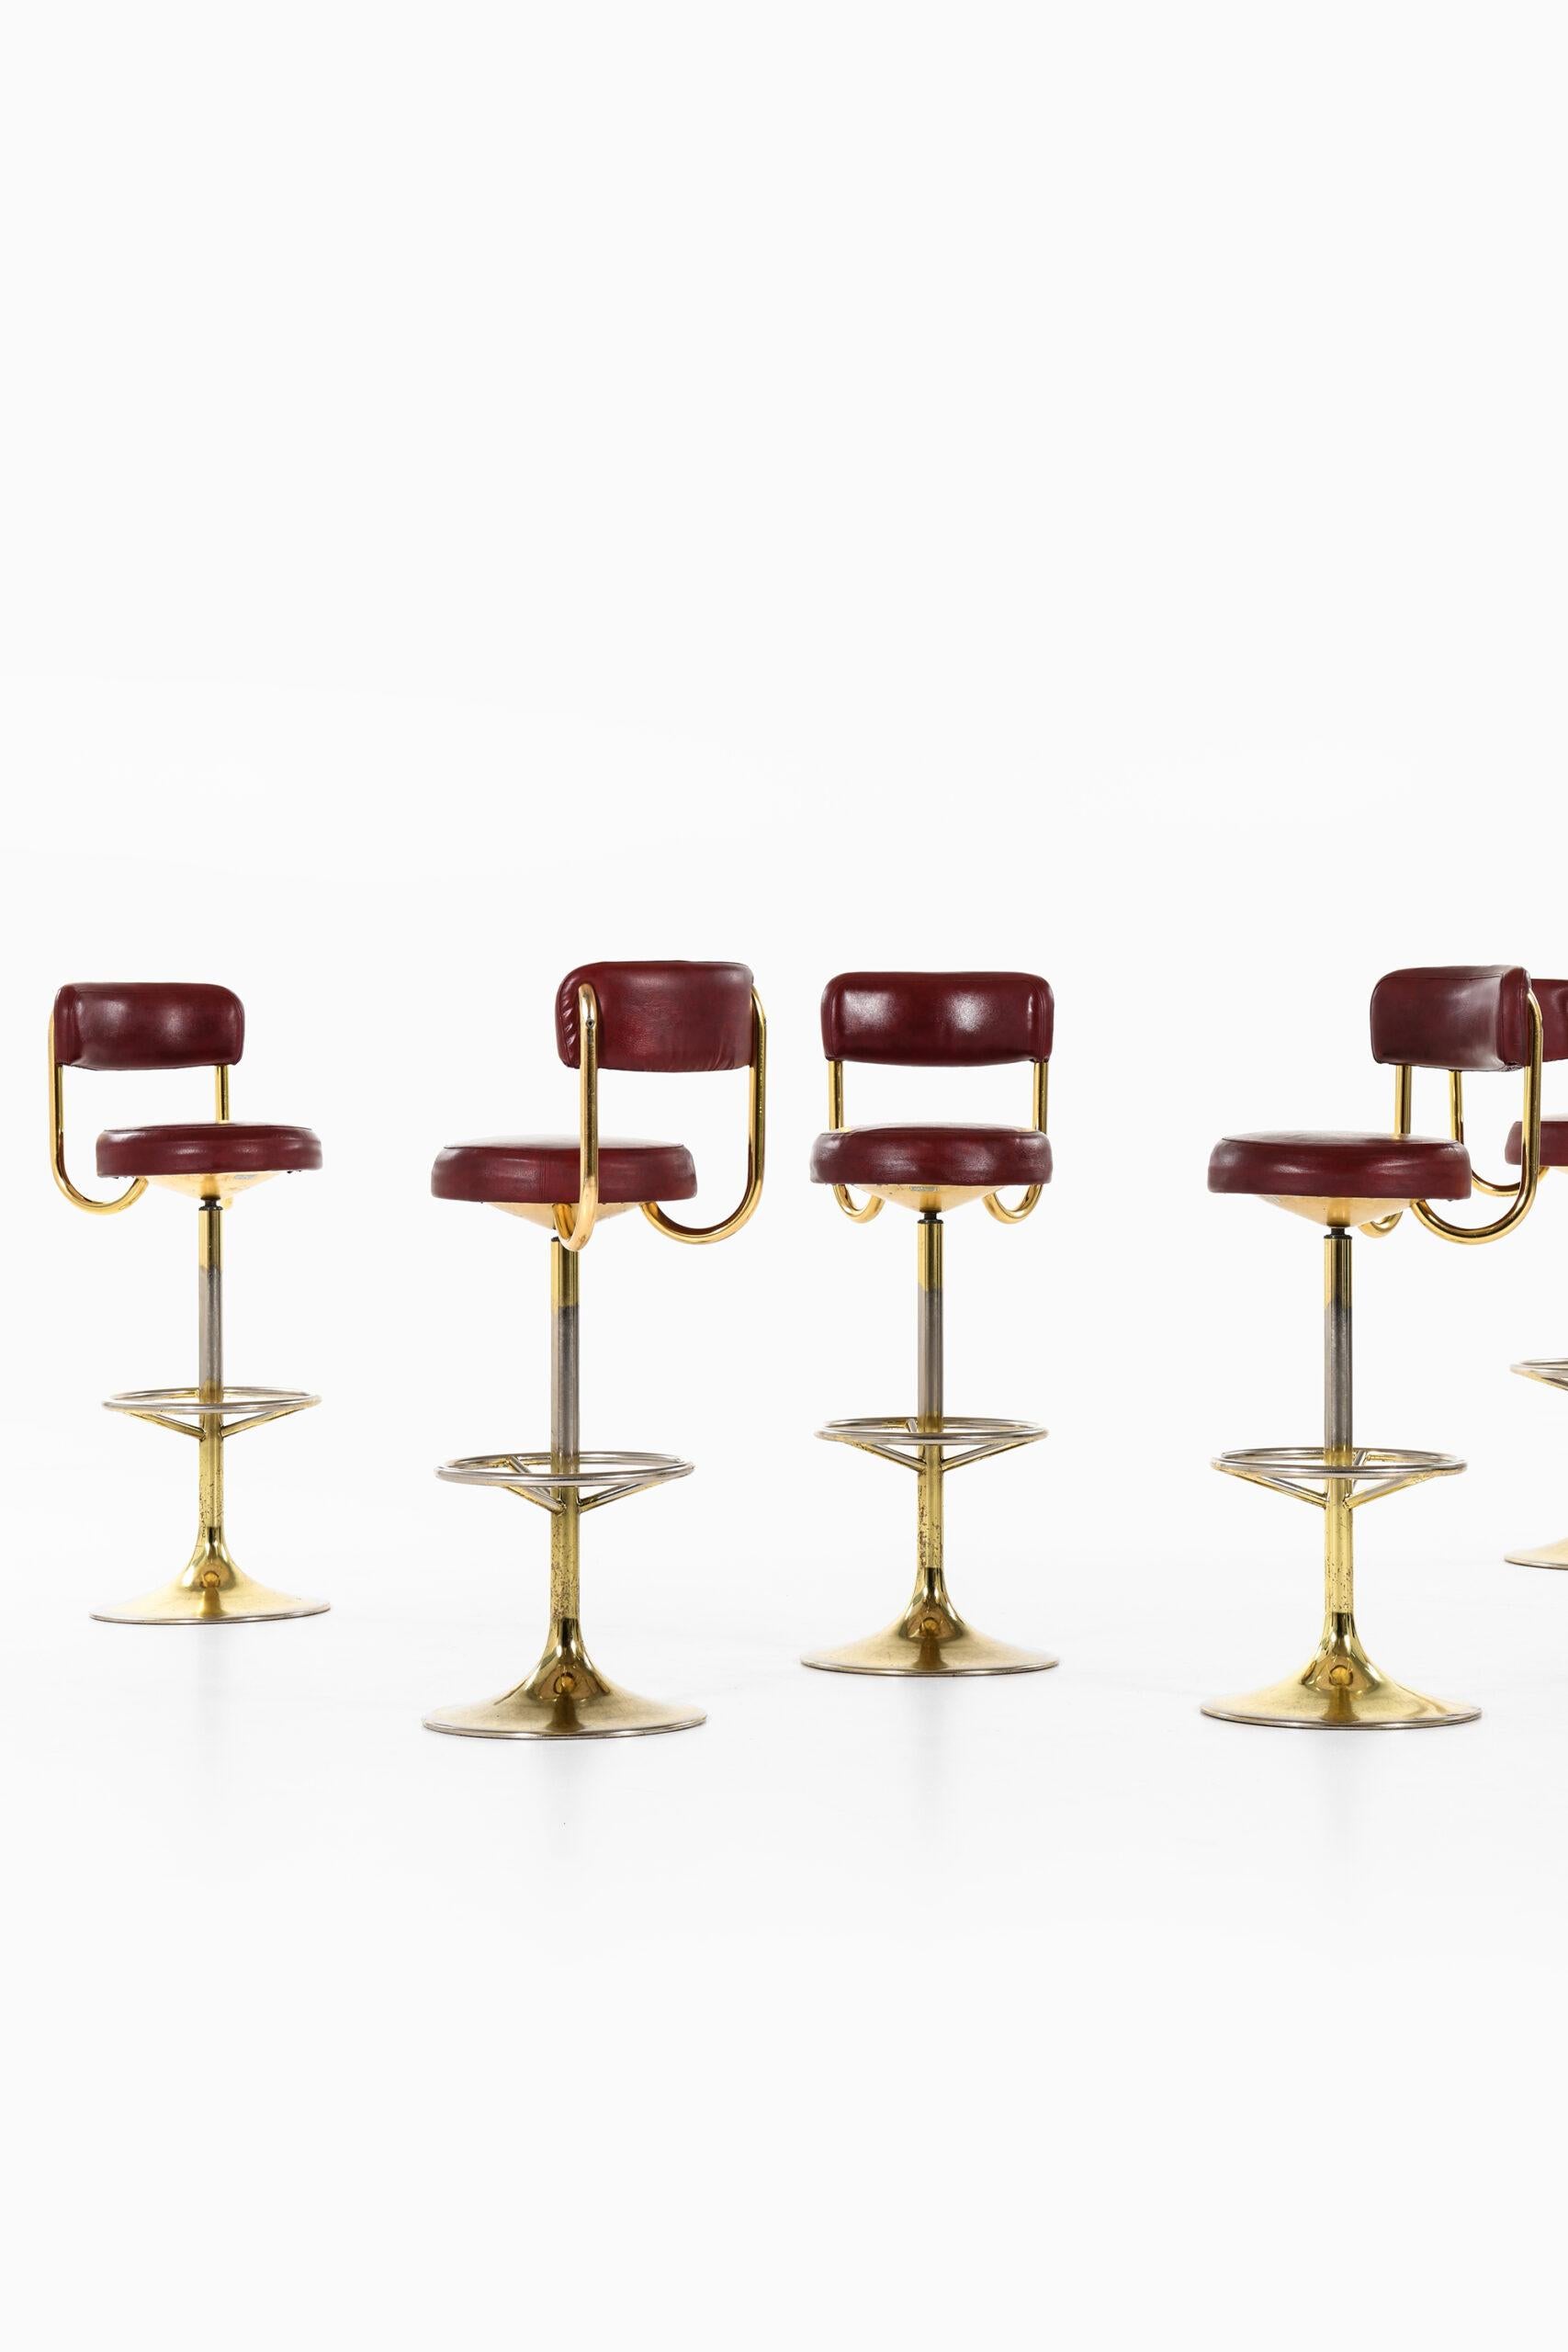 Bar stools designed by Börje Johanson. Produced by Johanson design in Markaryd, Sweden.
Price is listed / item.